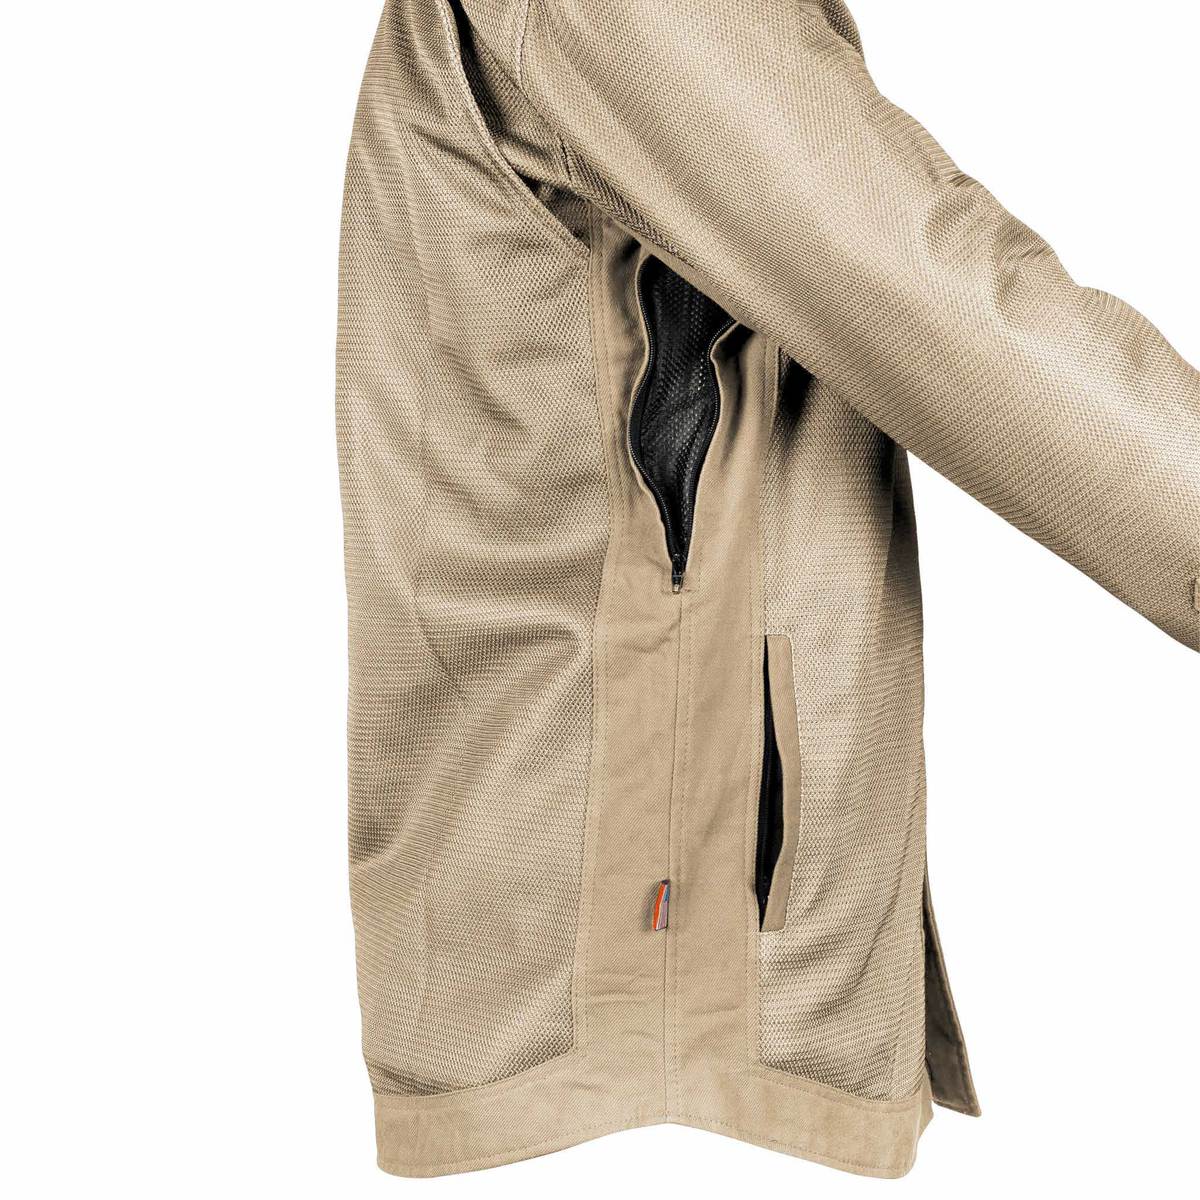 Protective Summer Mesh Shirt with Pads - Khaki Solid